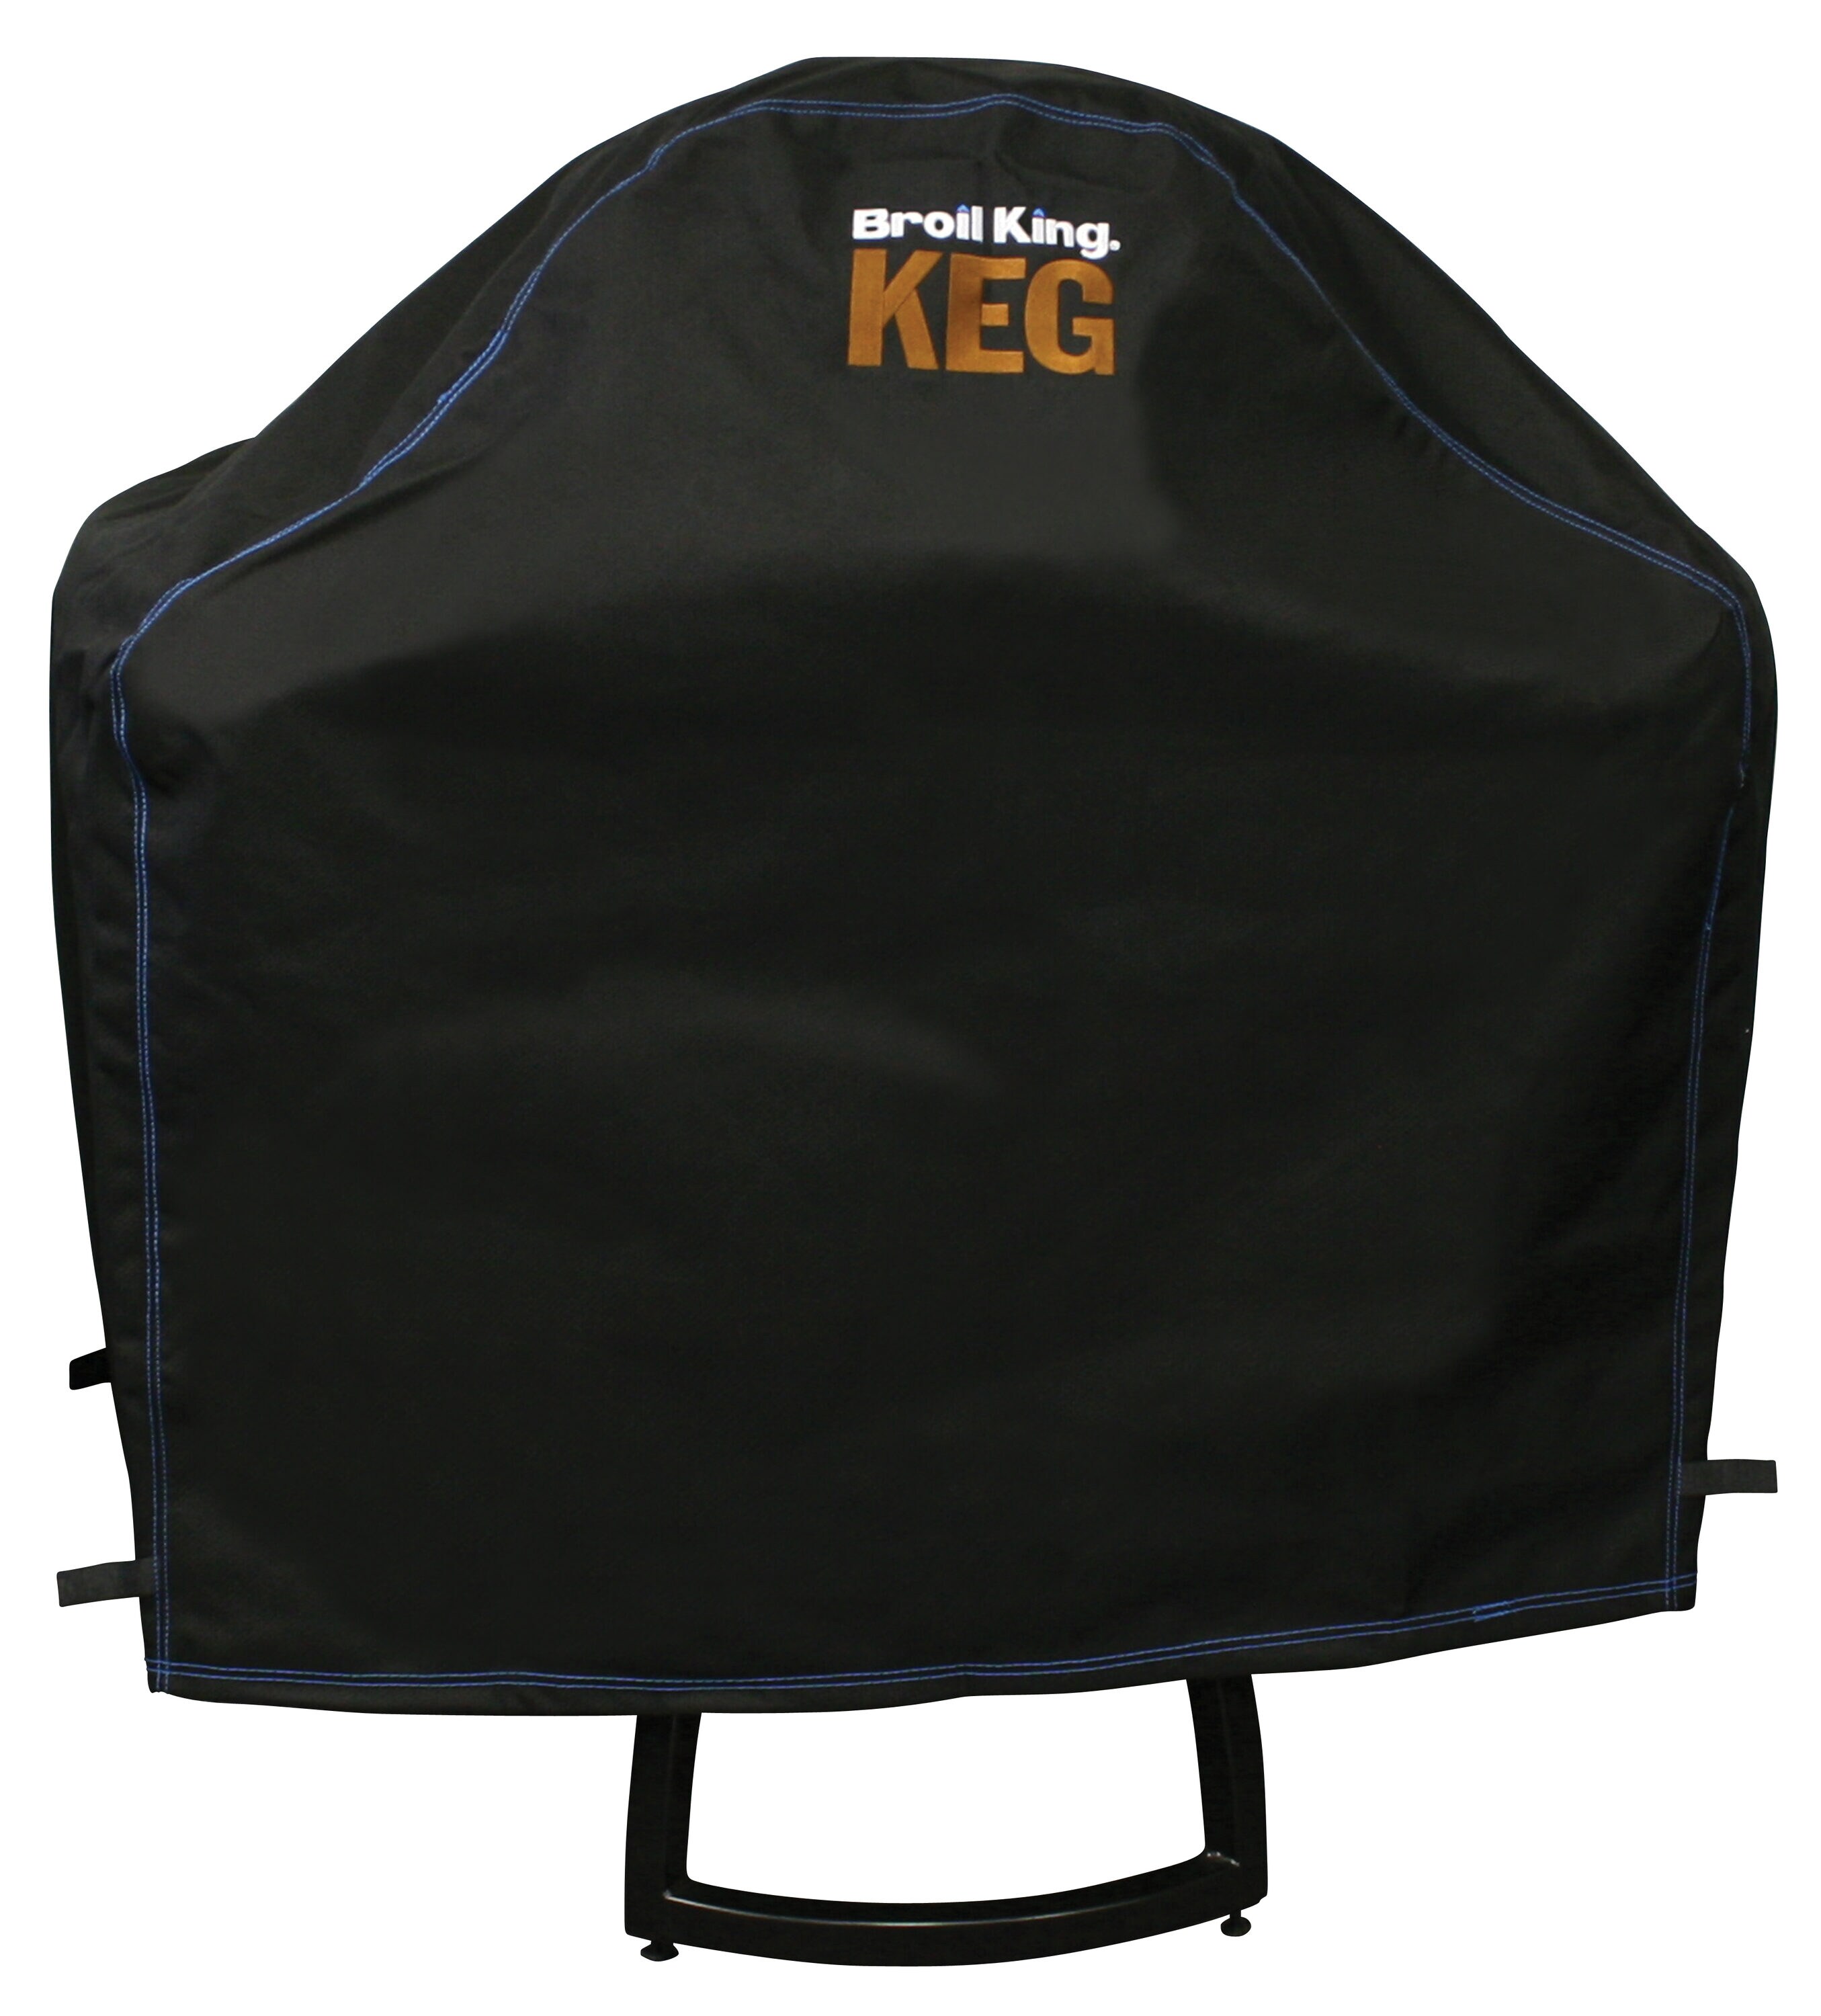 Broil King Keg Keg 40.35-in W x 39.37-in H Black with Blue Accent Stitching Charcoal Grill Cover in the Grill Covers department Lowes.com